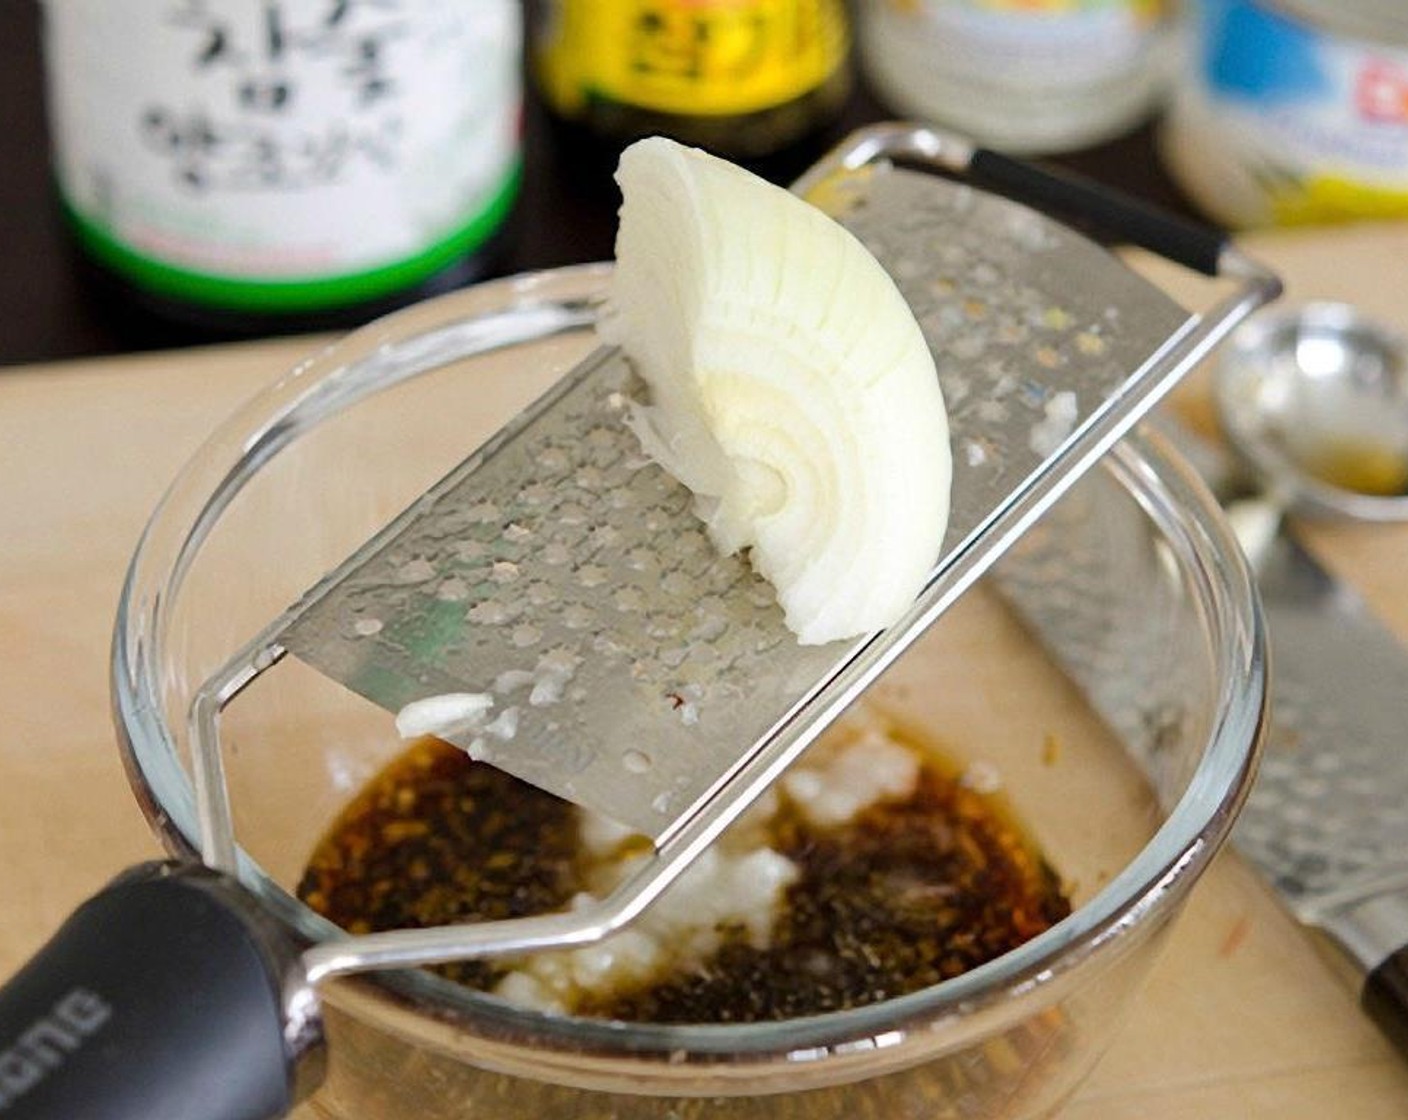 step 4 In a small mixing bowl, combine Low-Sodium Soy Sauce (1/3 cup) Granulated Sugar (3 Tbsp) minced garlic cloves (2), grated onion, and Rice Wine (1 Tbsp).